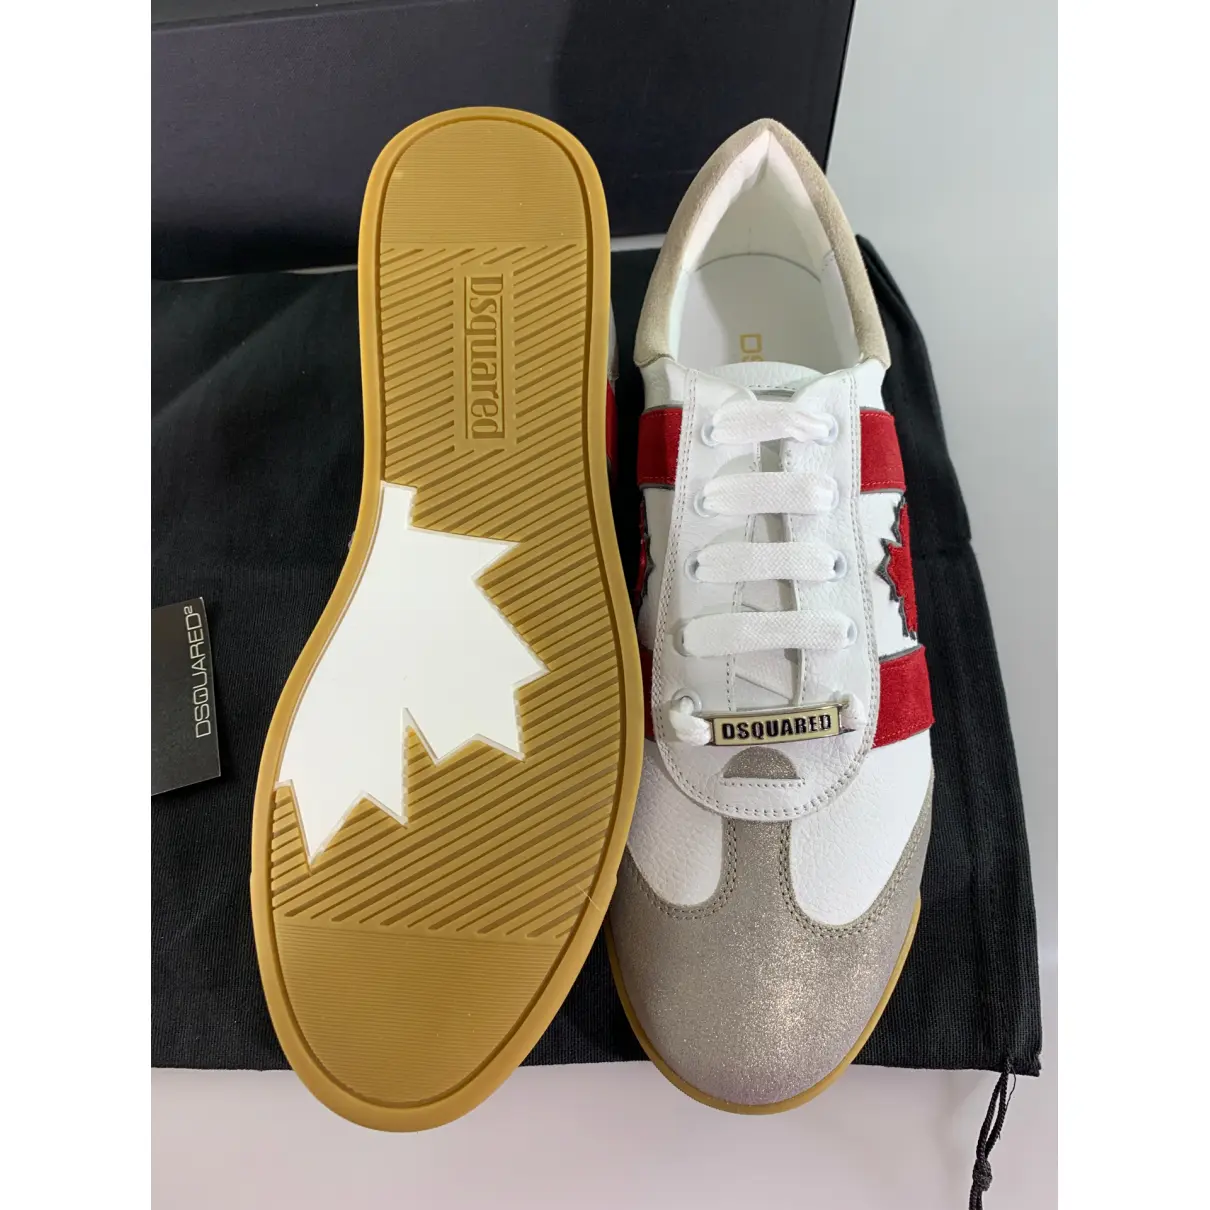 Buy Dsquared2 New Runner leather low trainers online